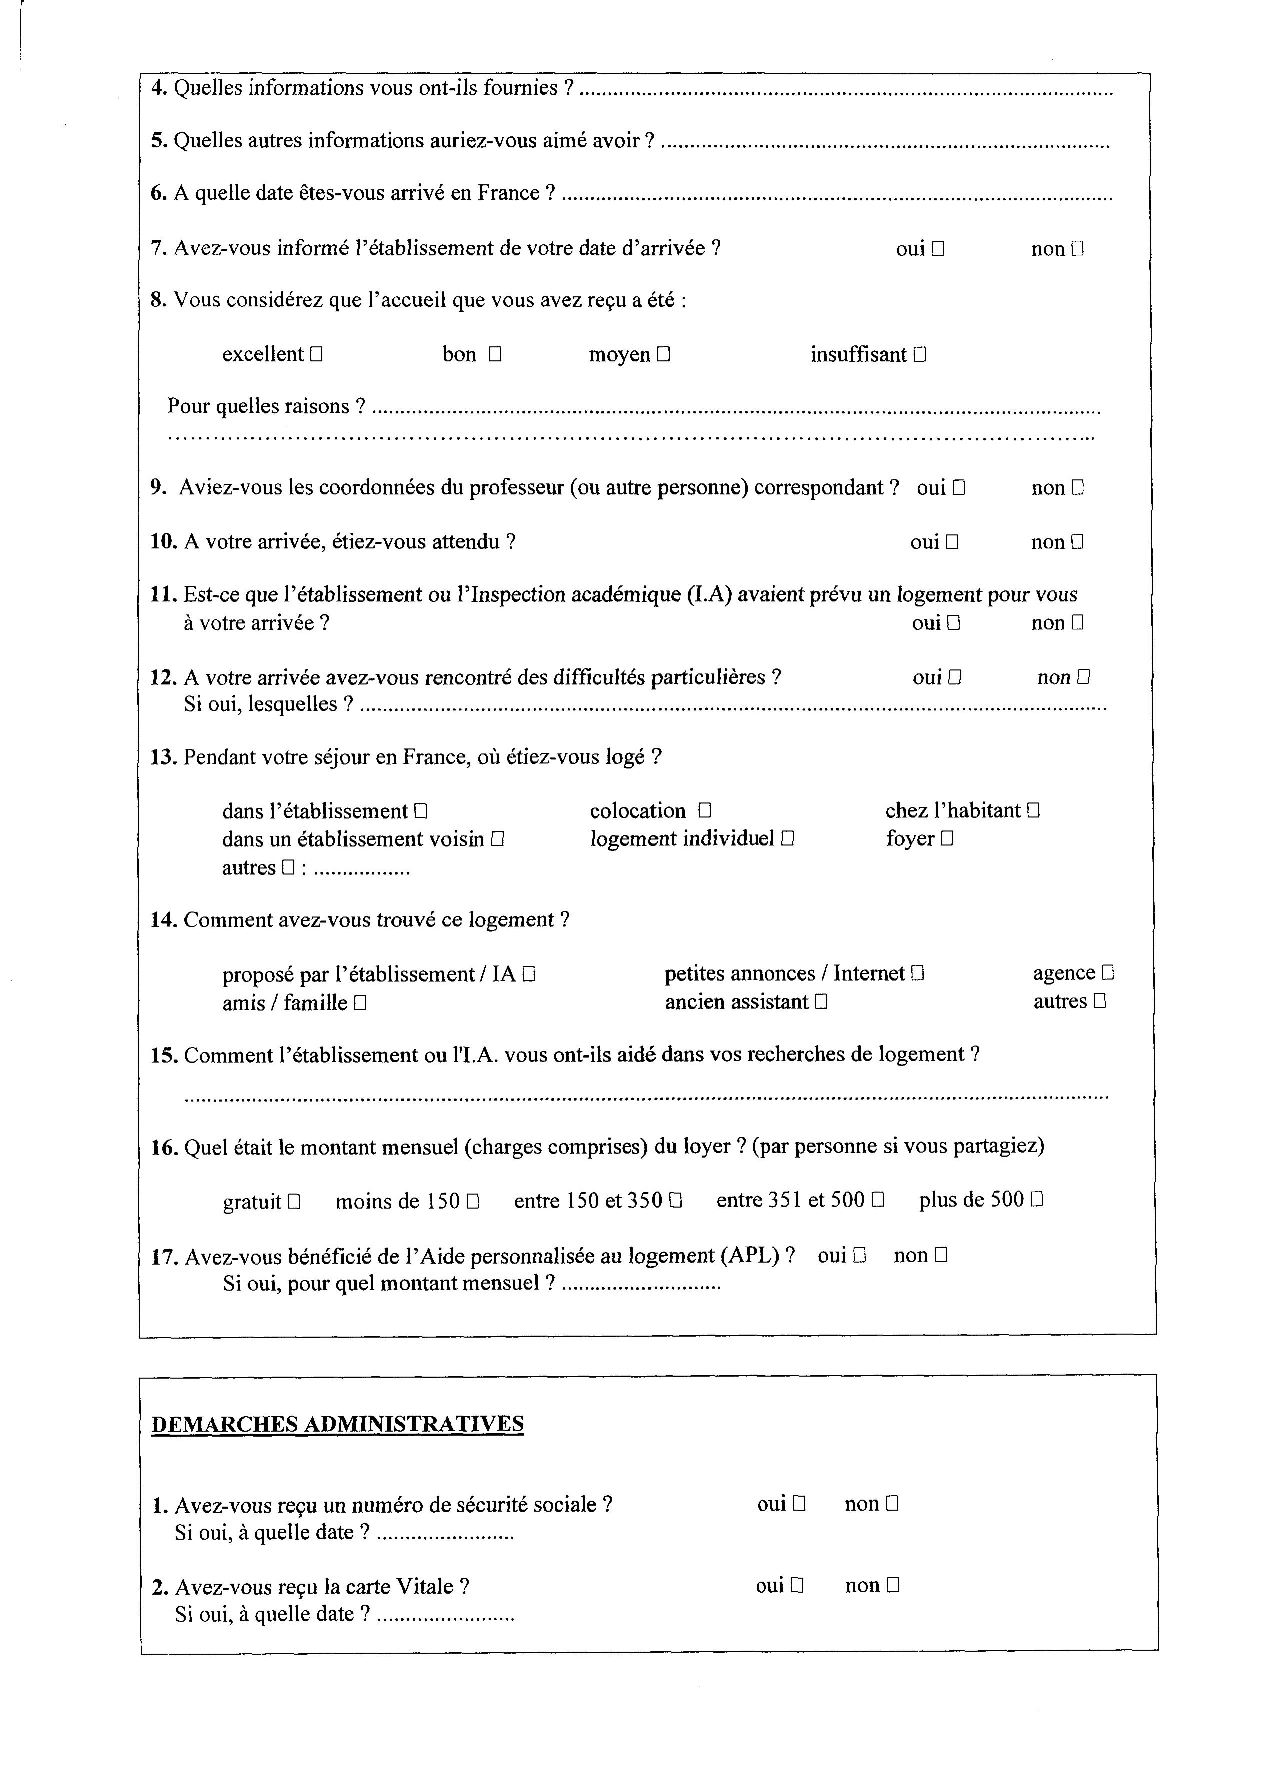 Resume fill out forms